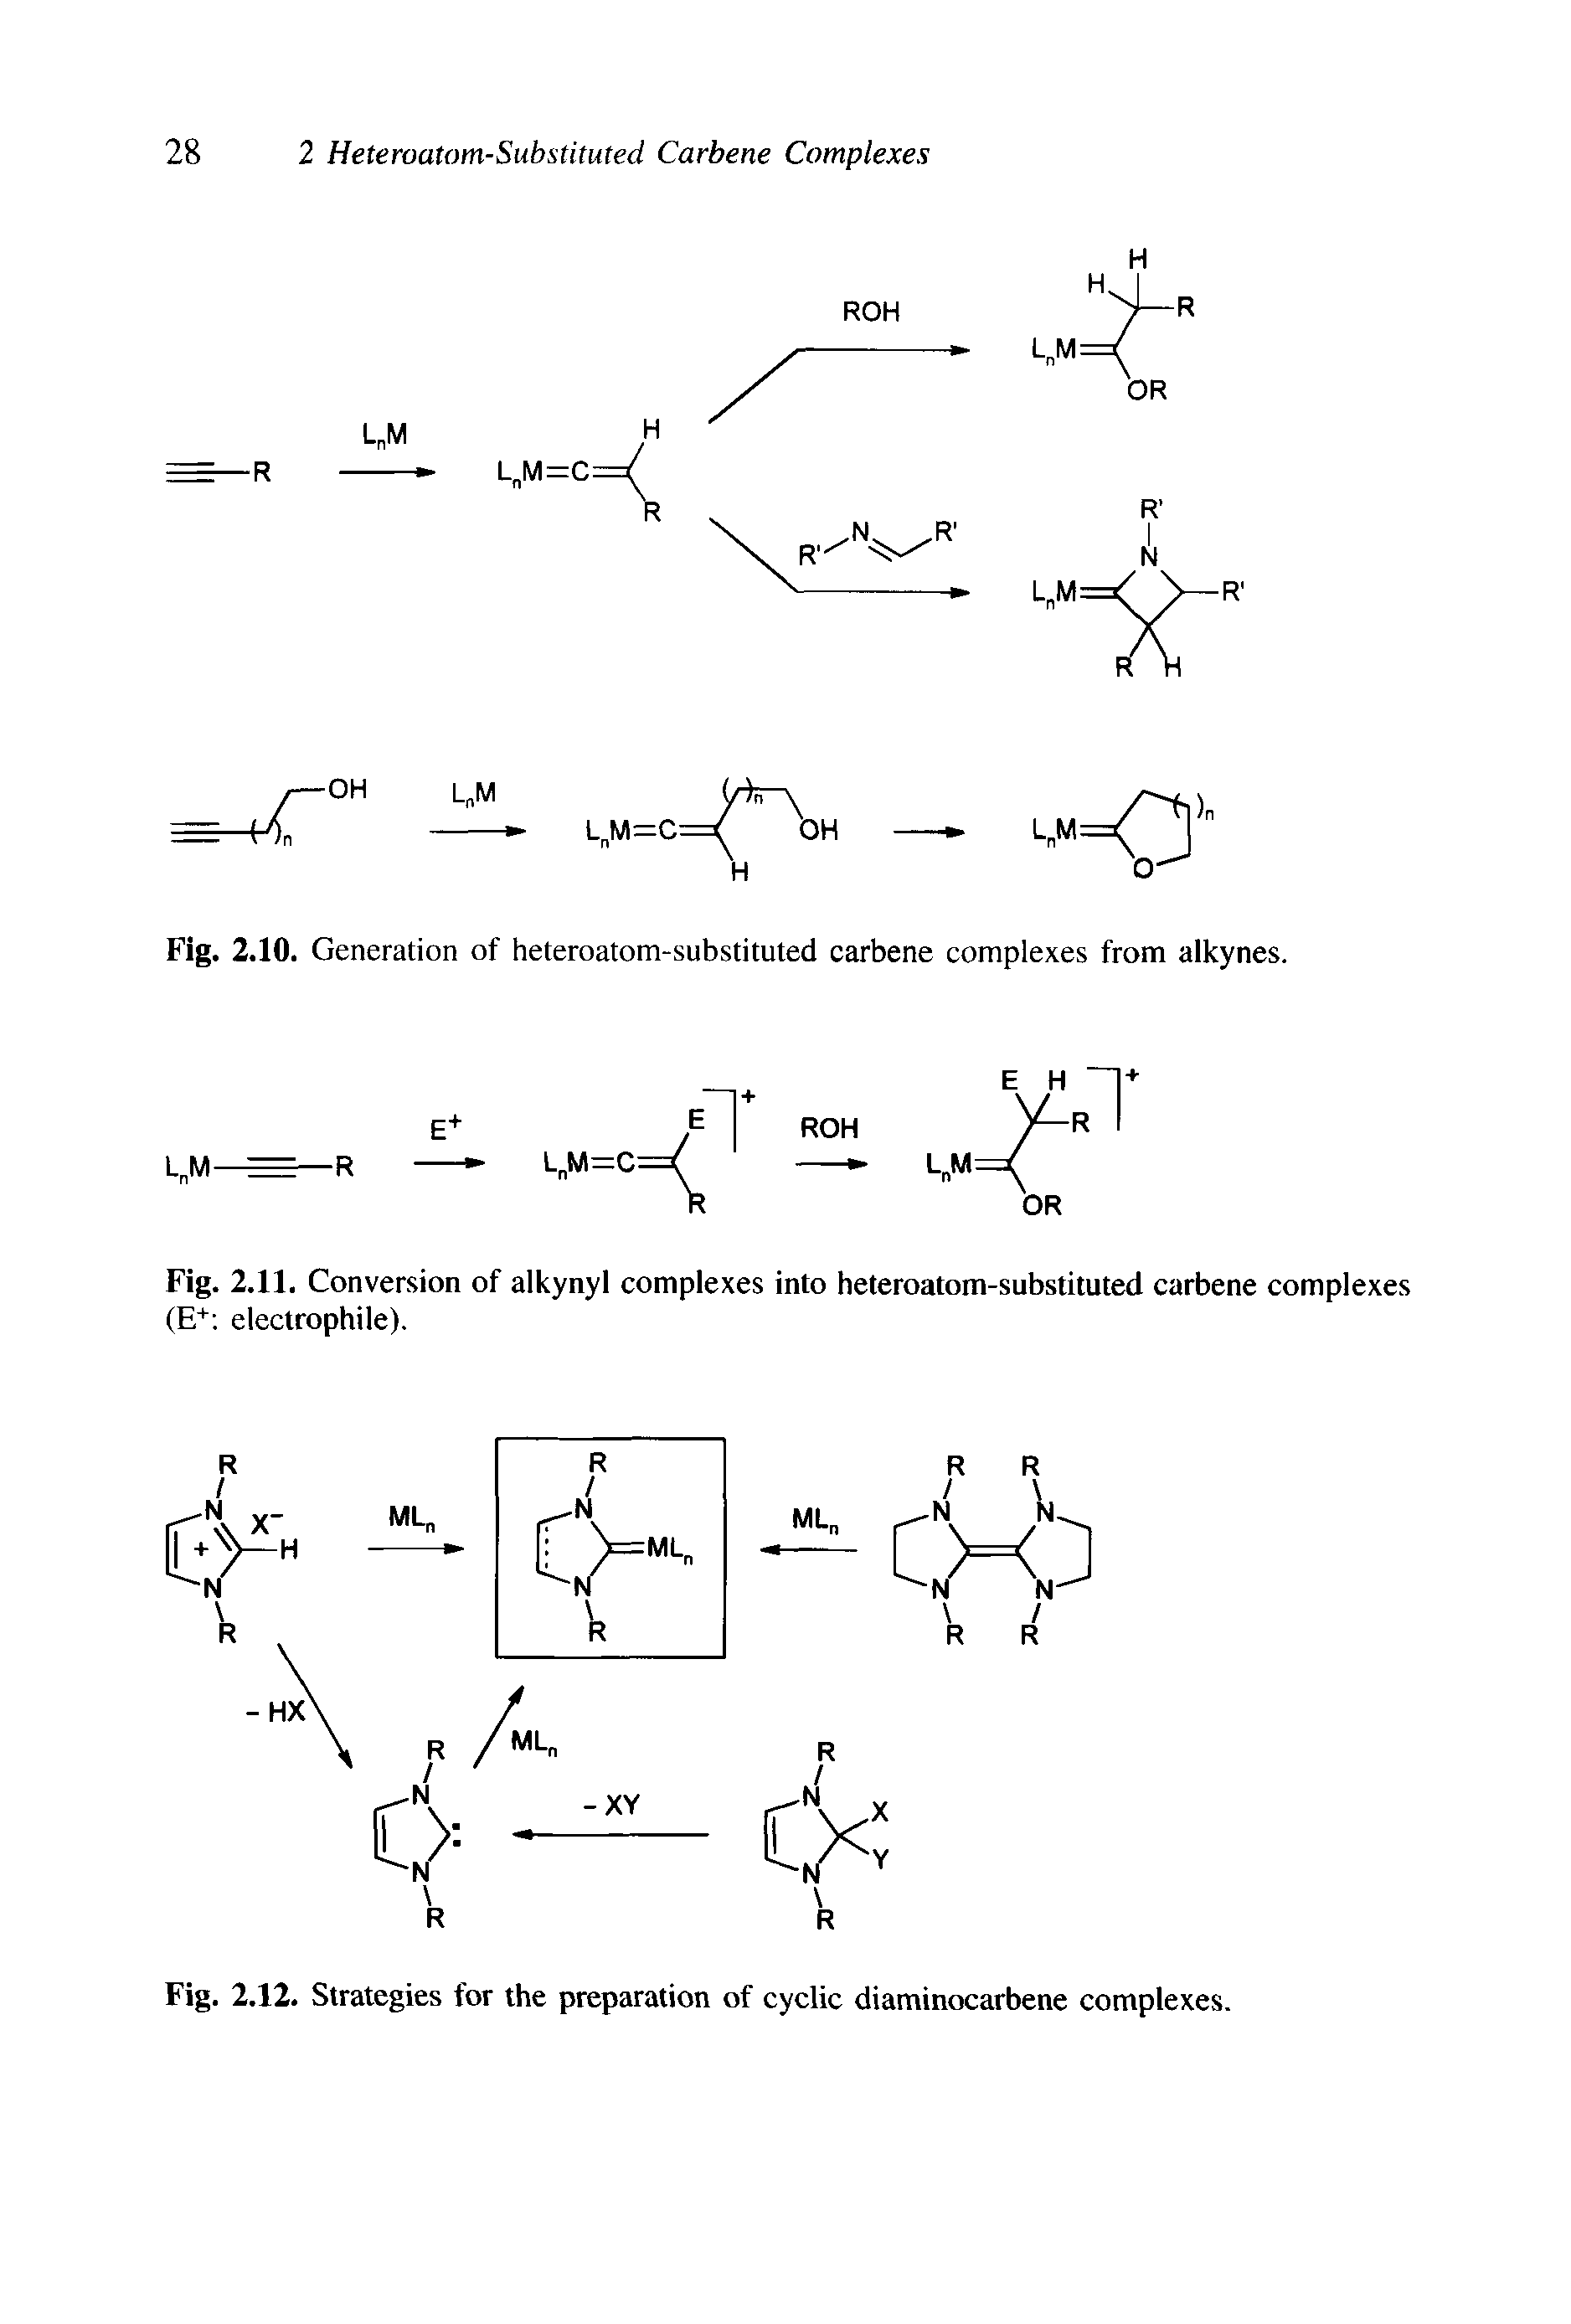 Fig. 2.10. Generation of heteroatom-substituted carbene complexes from alkynes.